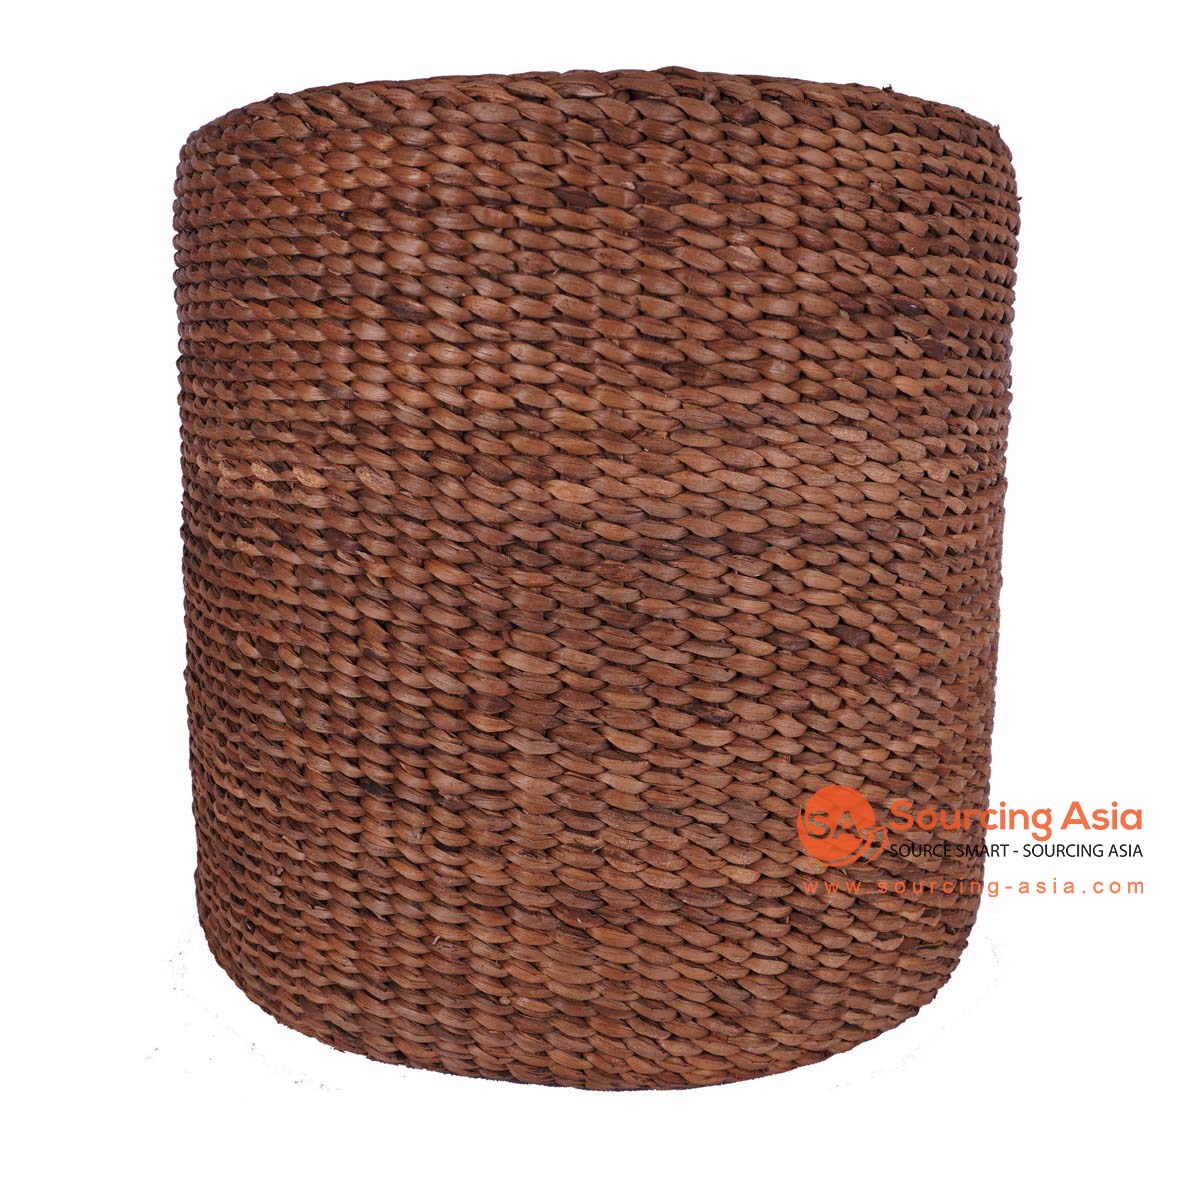 HBSC600 NATURAL WATER HYACINTH ROUND FOOT POUFFE